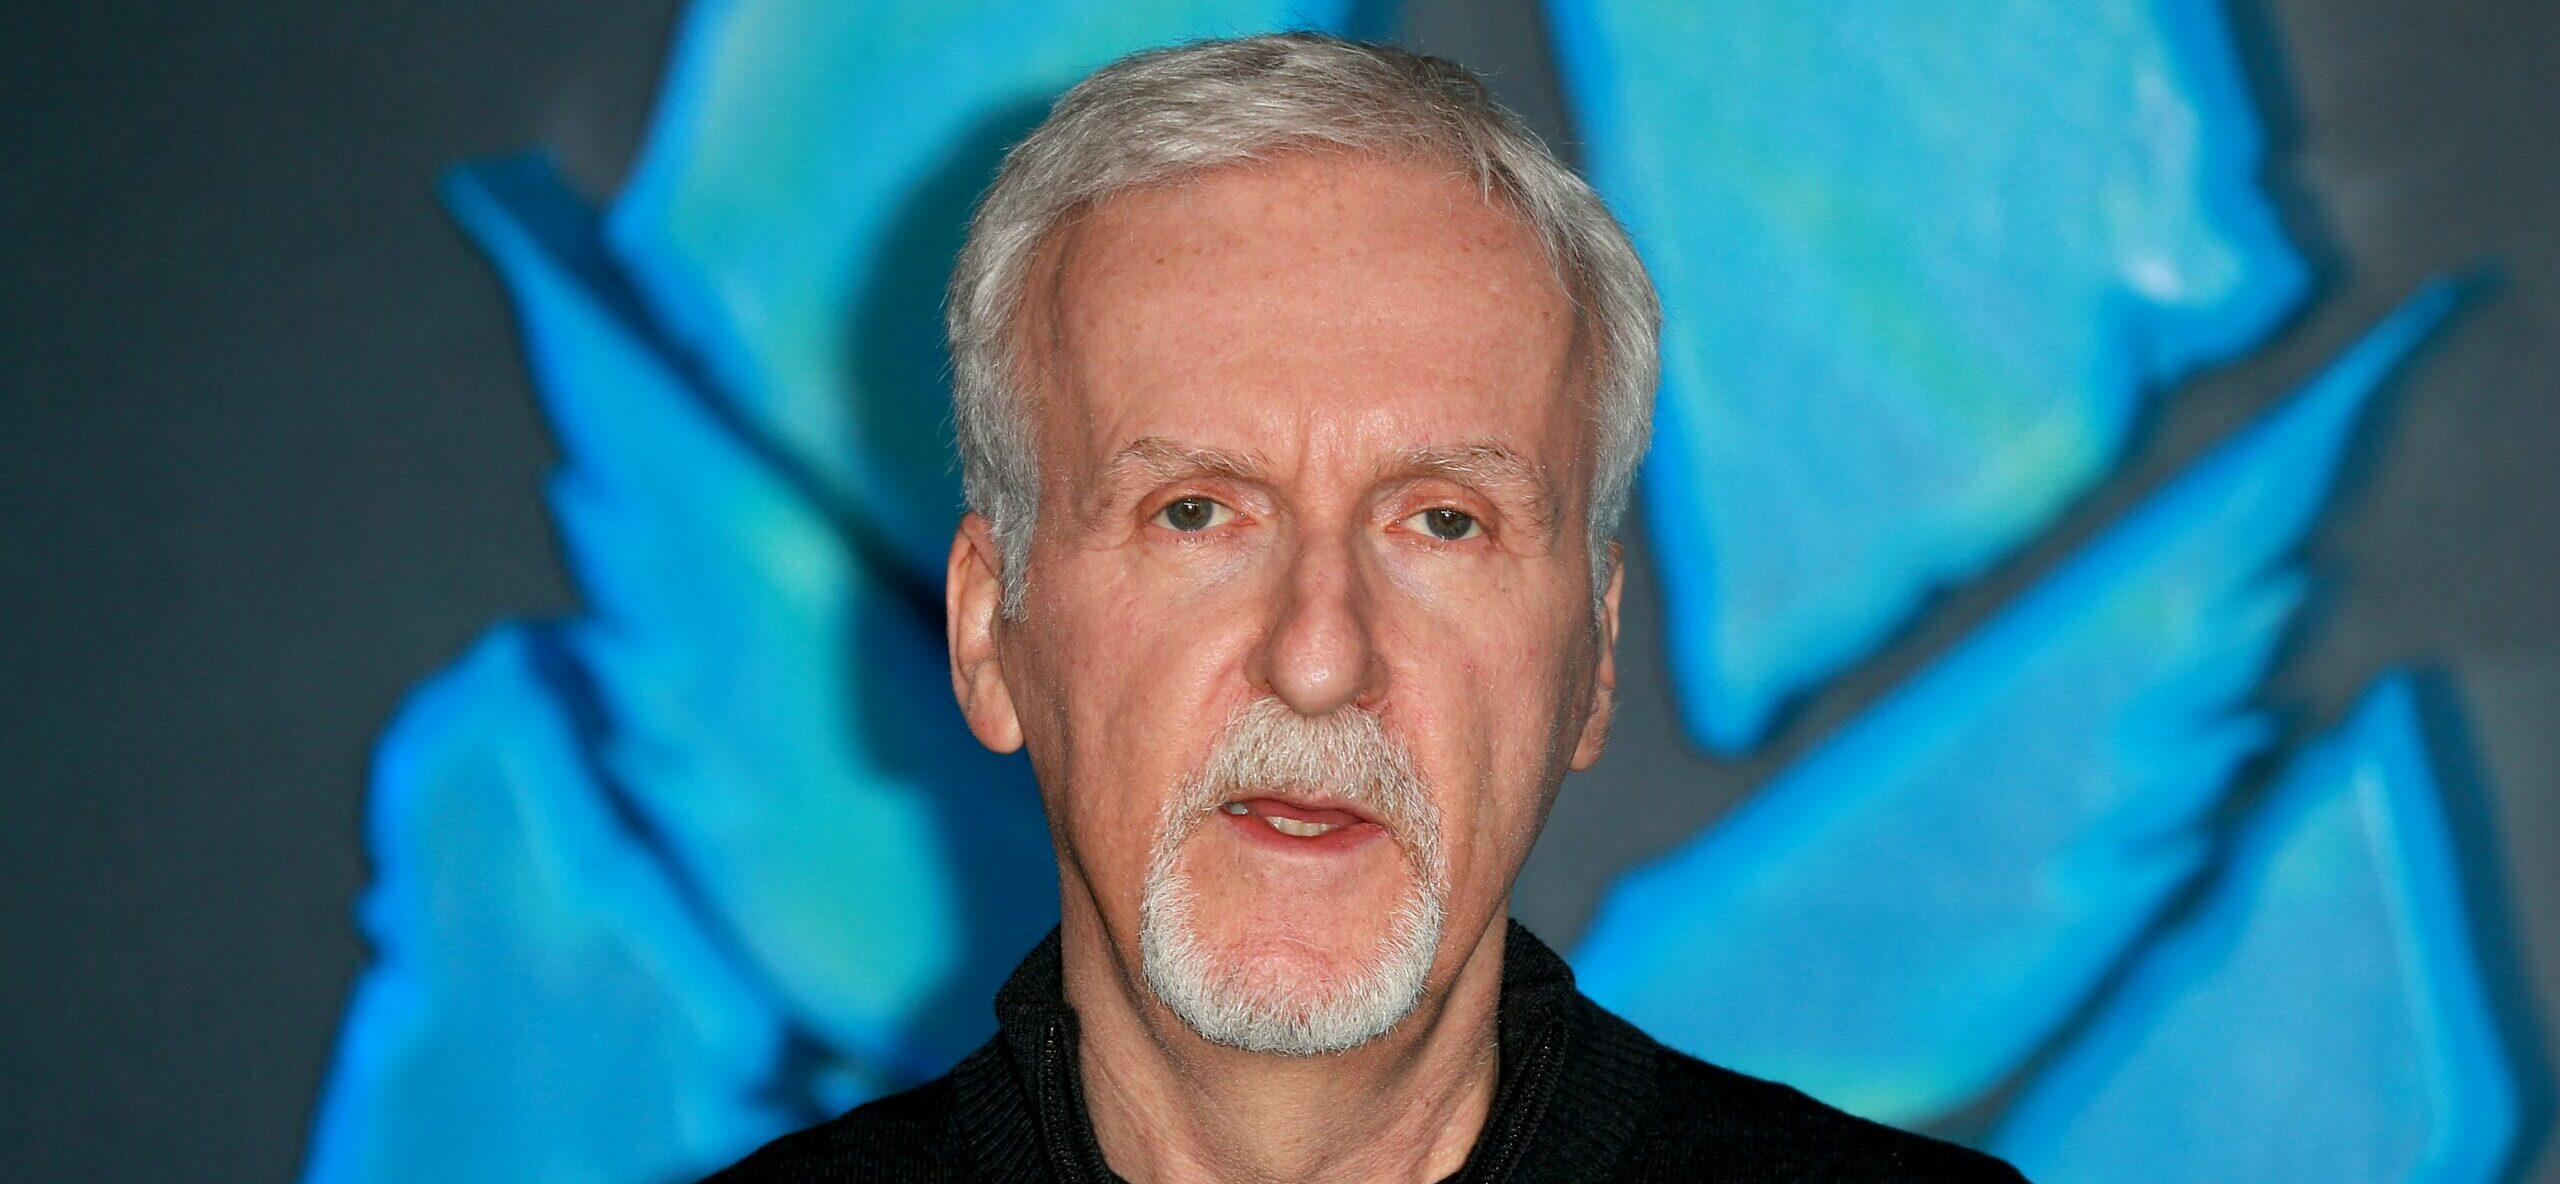 James Cameron Recounts Scary Near-Death Experience During Filming of ‘The Abyss’